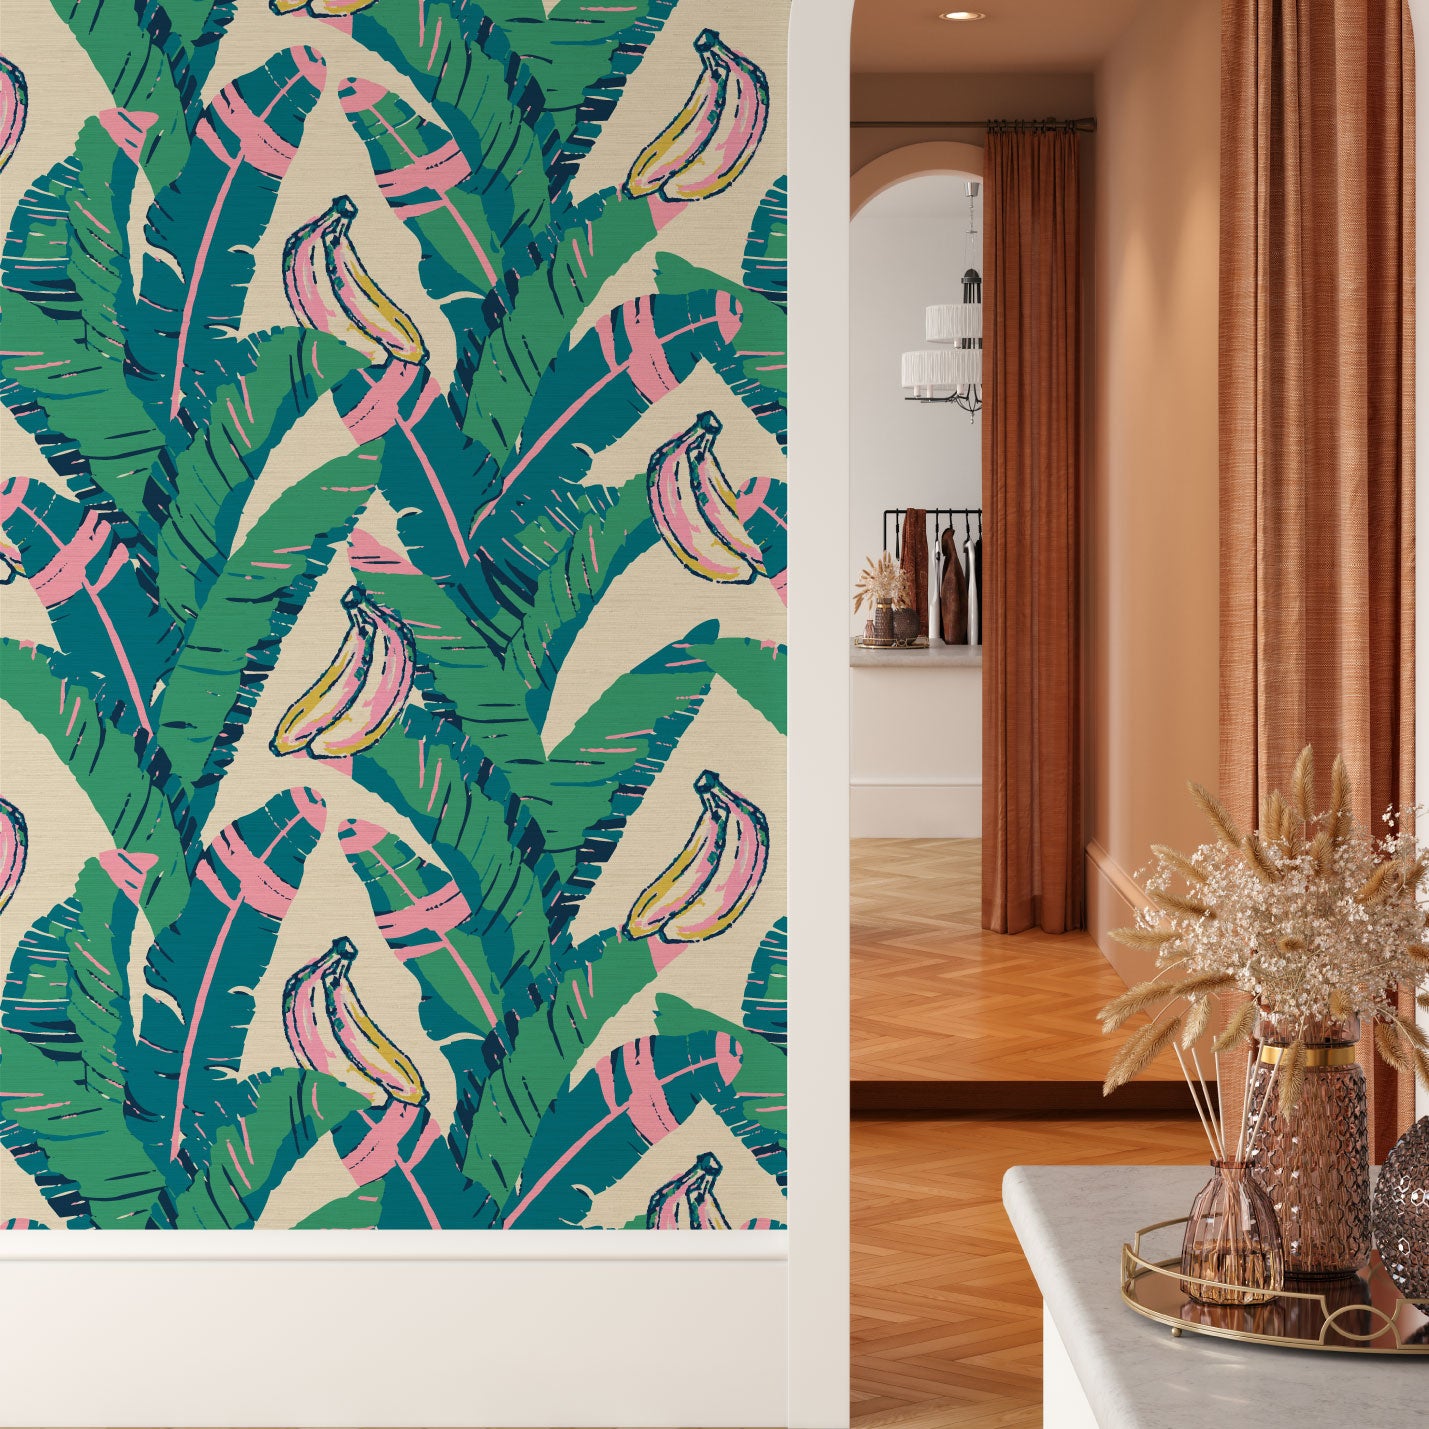 printed grasscloth wallpaper oversized banana leafs vertical stripe bananas Grasscloth Natural Textured Eco-Friendly Non-toxic High-quality Sustainable practices Sustainability Interior Design Wall covering Bold Wallpaper Custom Tailor-made Retro chic Tropical jungle garden botanical food vacation beach kid